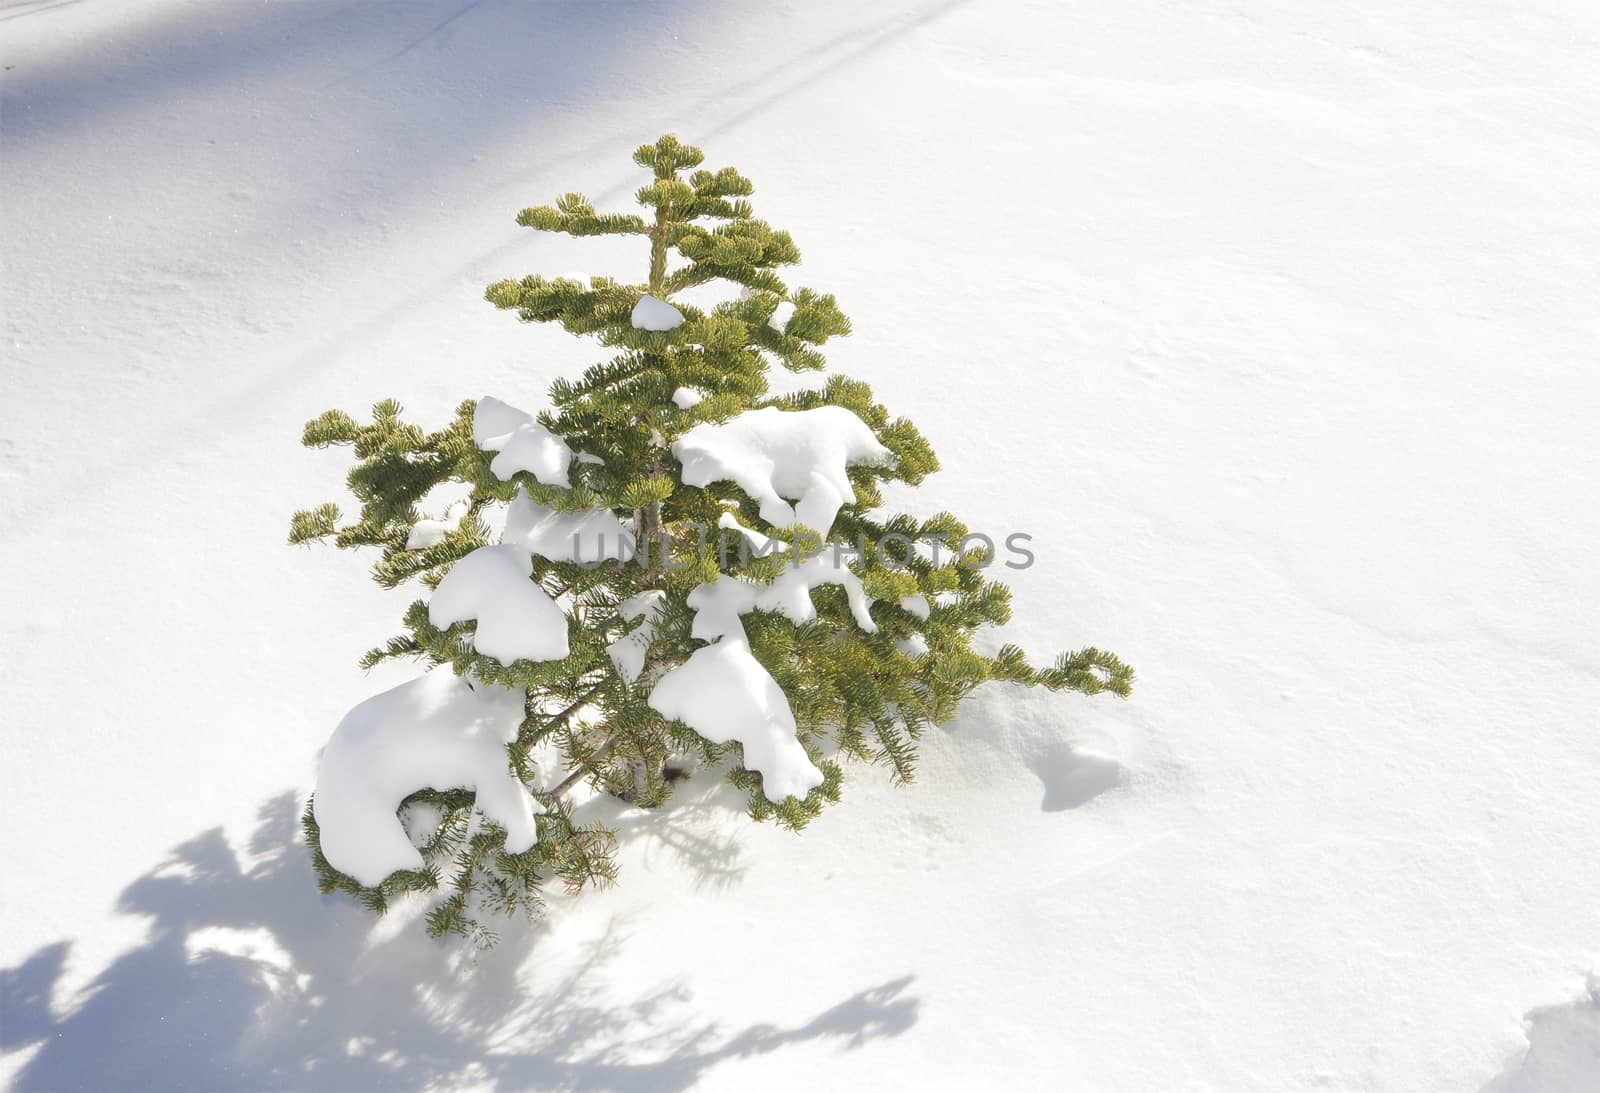 Snow buried Pine tree in California. by Njean